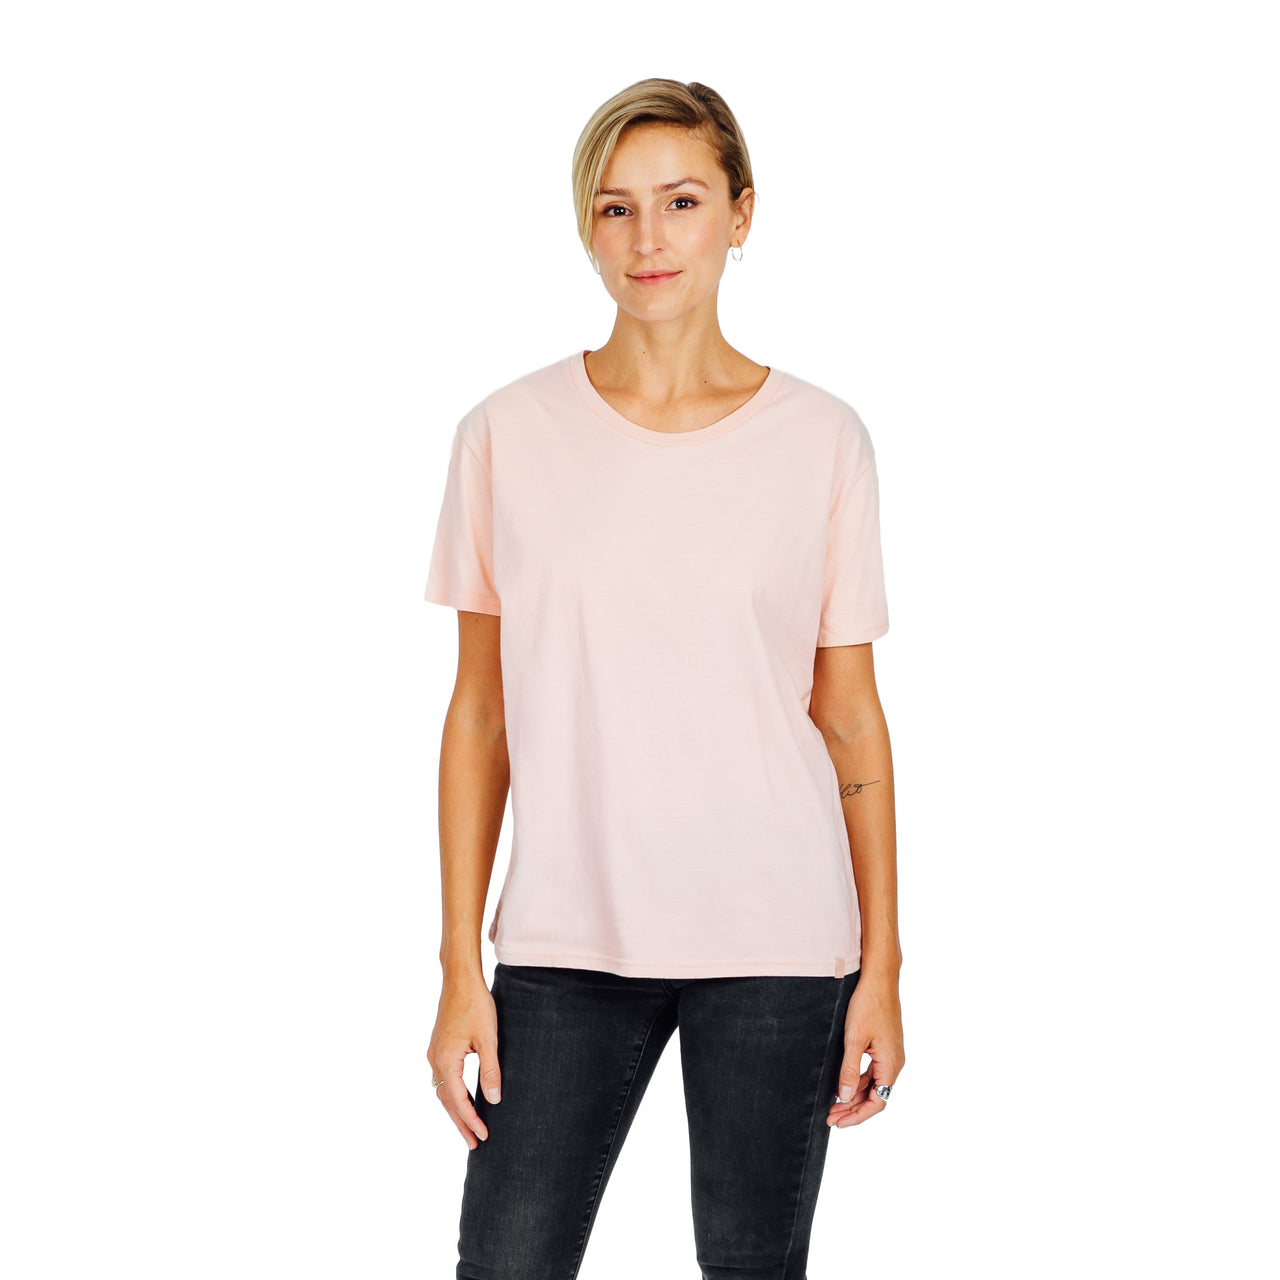 Women's Relaxed Fit Tee - Blush